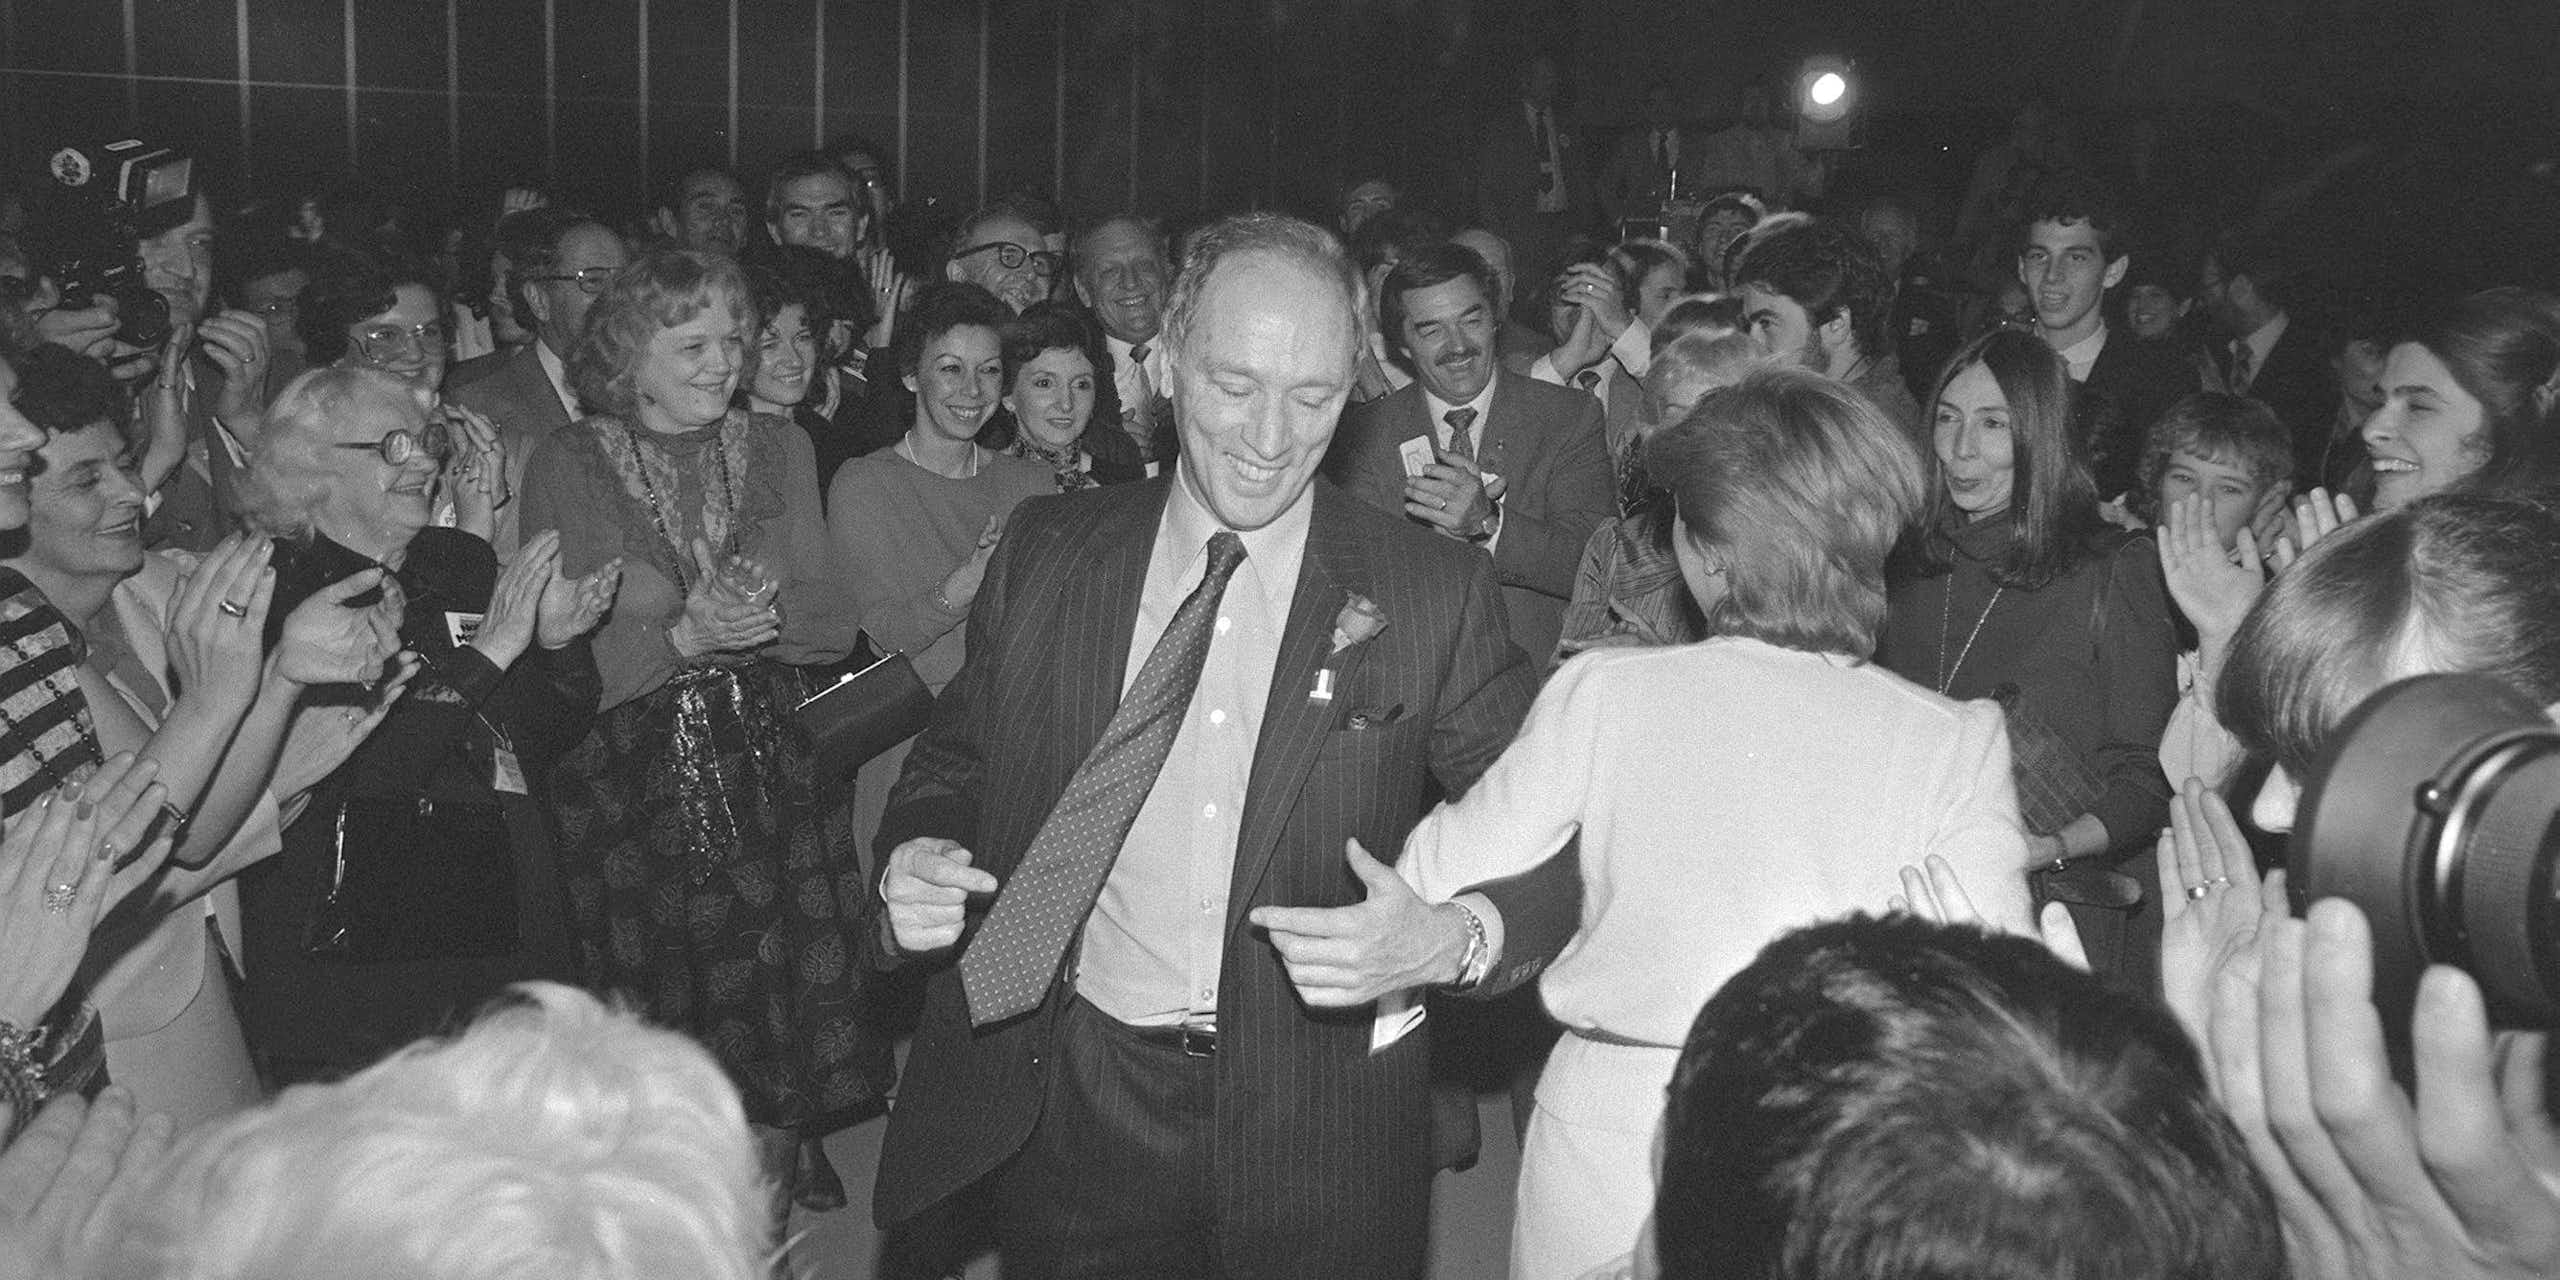 A man in a suit and tie smiles as he dances. People around him smile and dance.